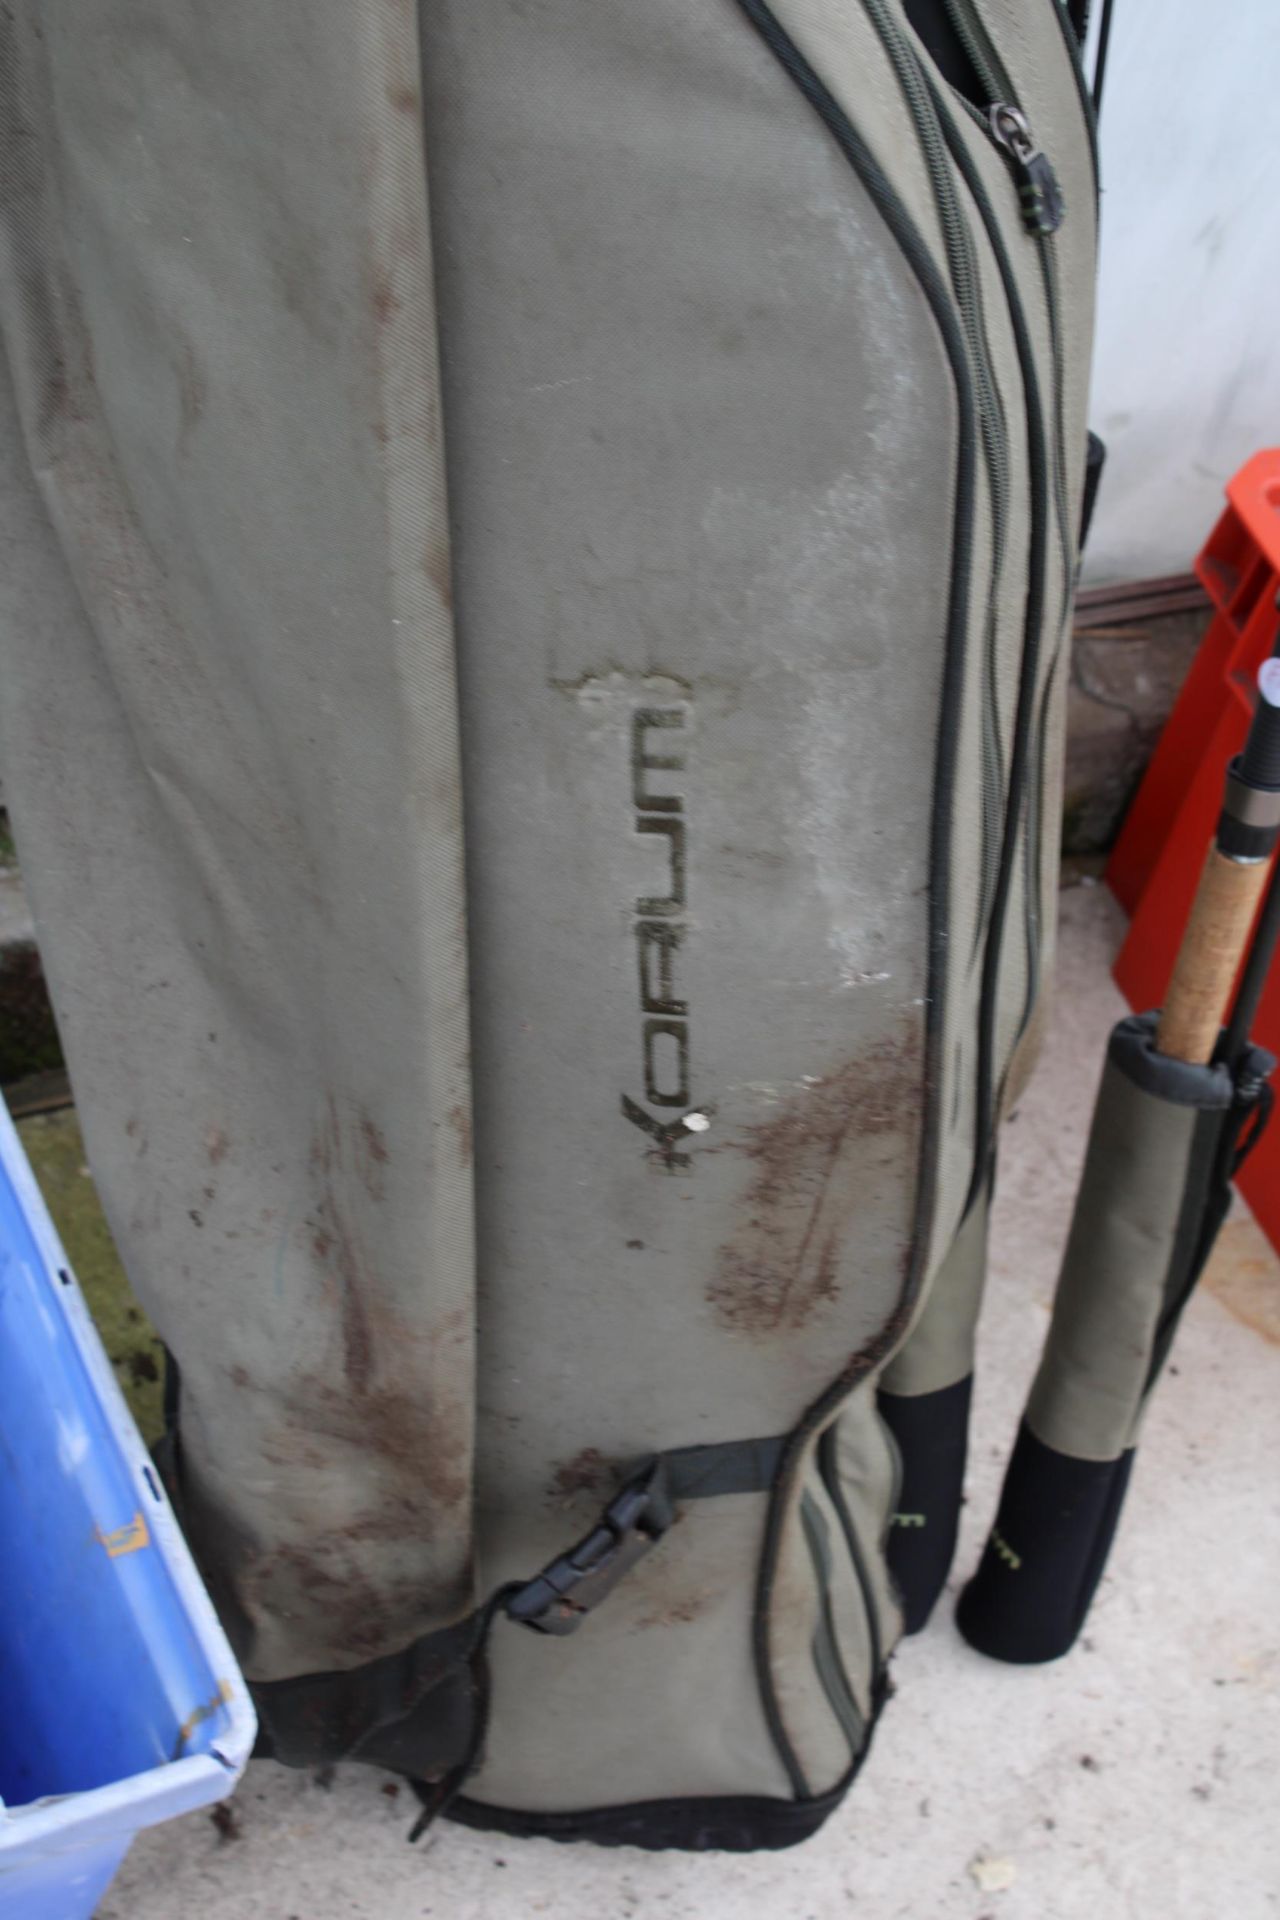 A ROD CARRYING BAG AND TWO VARIOUS FISHING RODS - Image 6 of 6